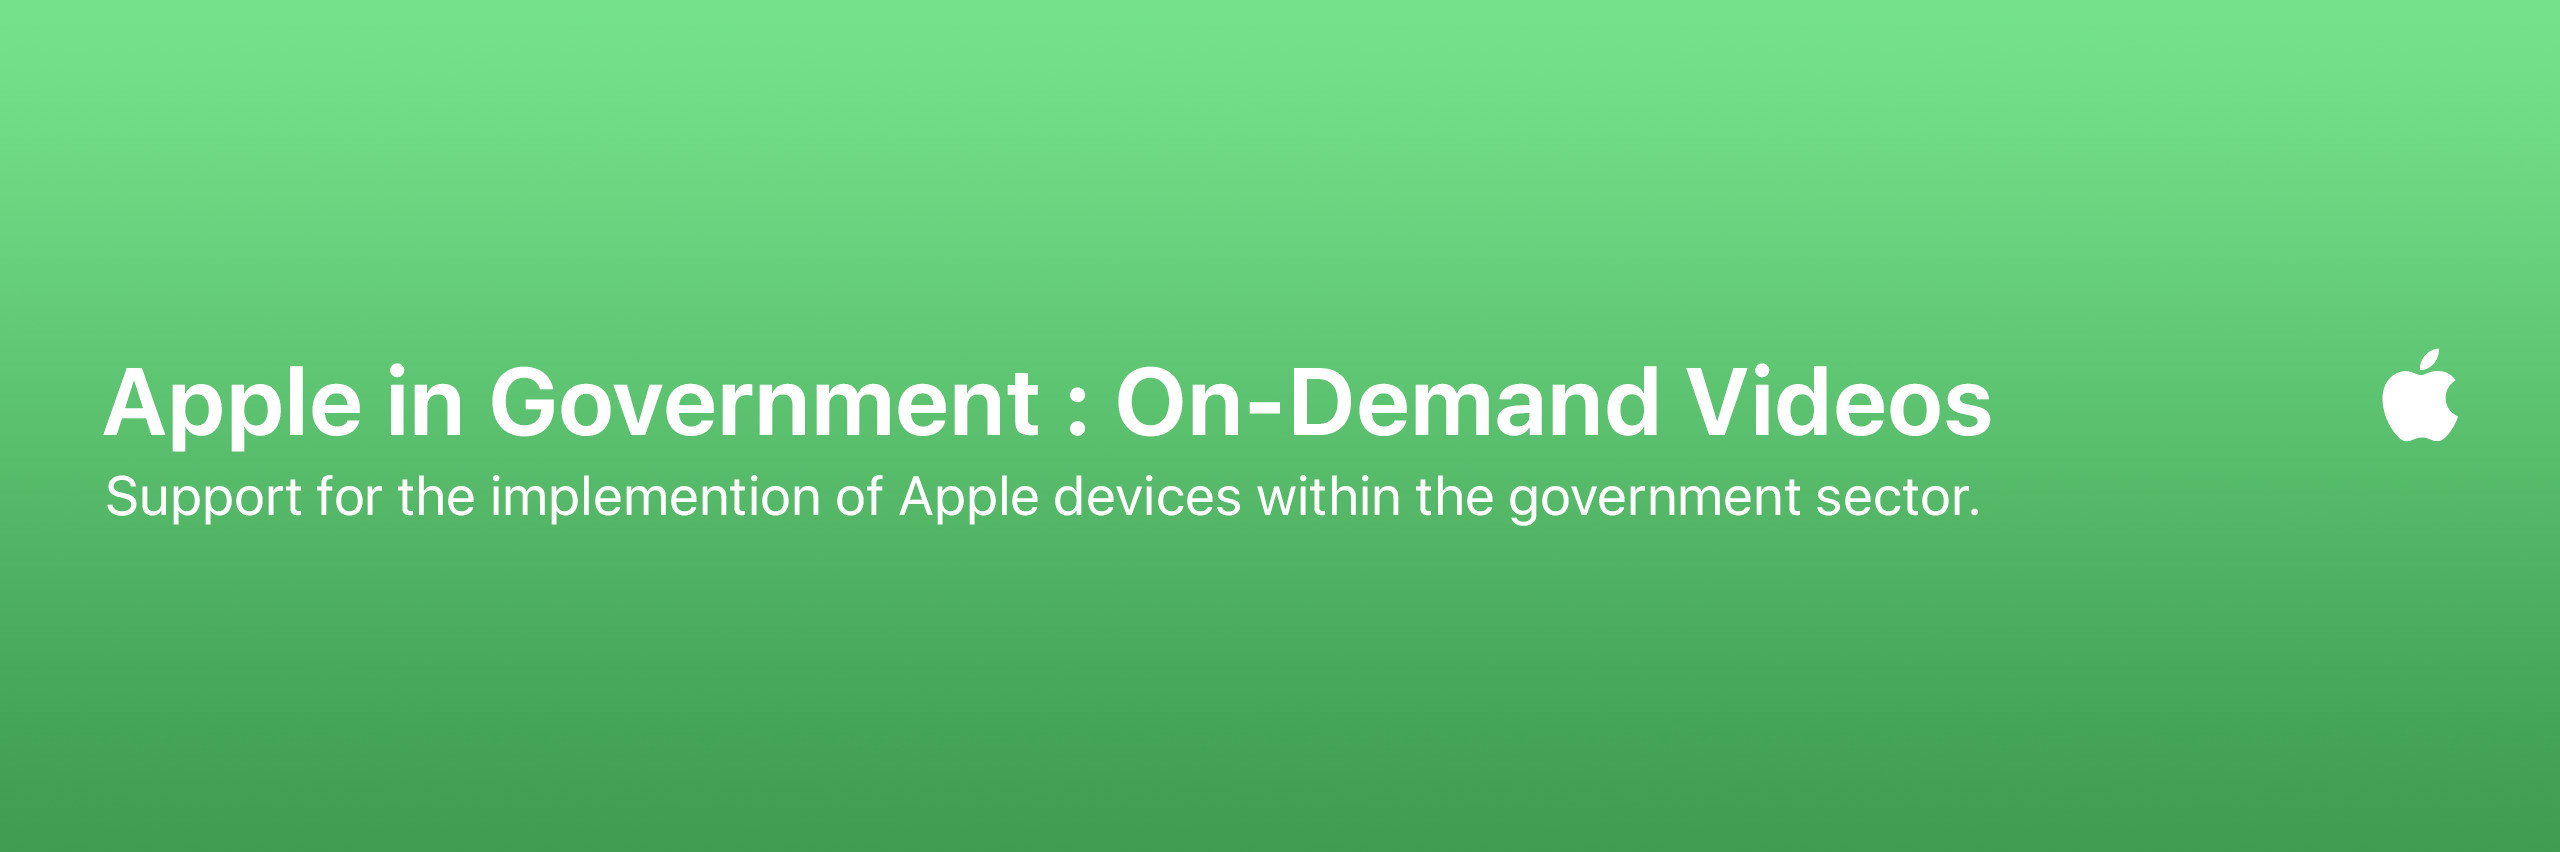 Apple in Government : On-Demand Videos